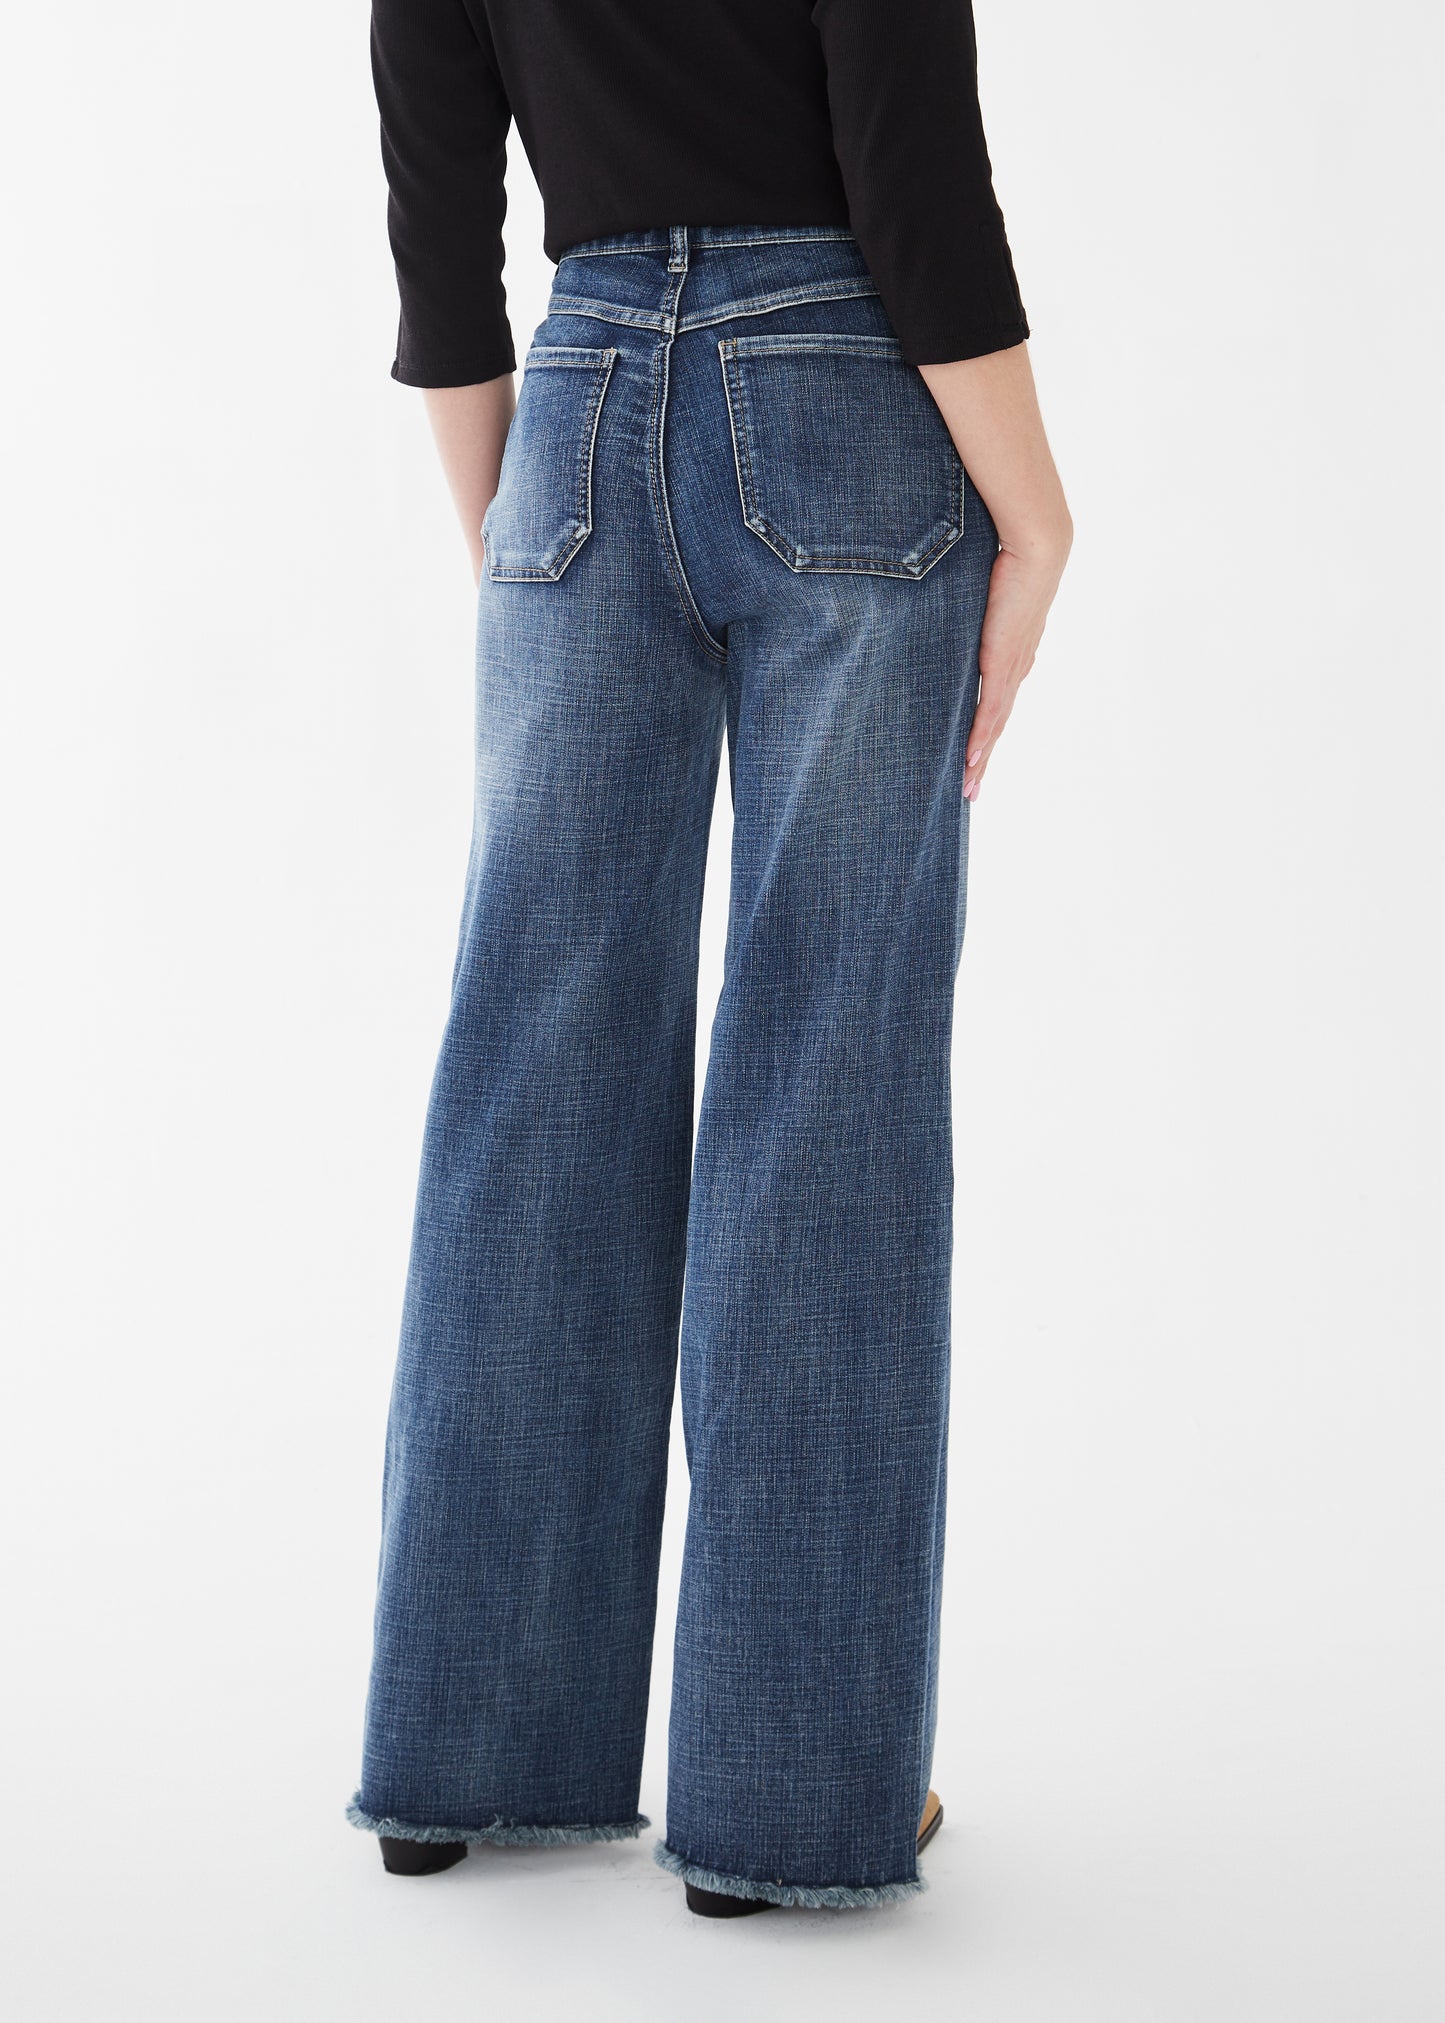 Suzanne Jeans By FDJ